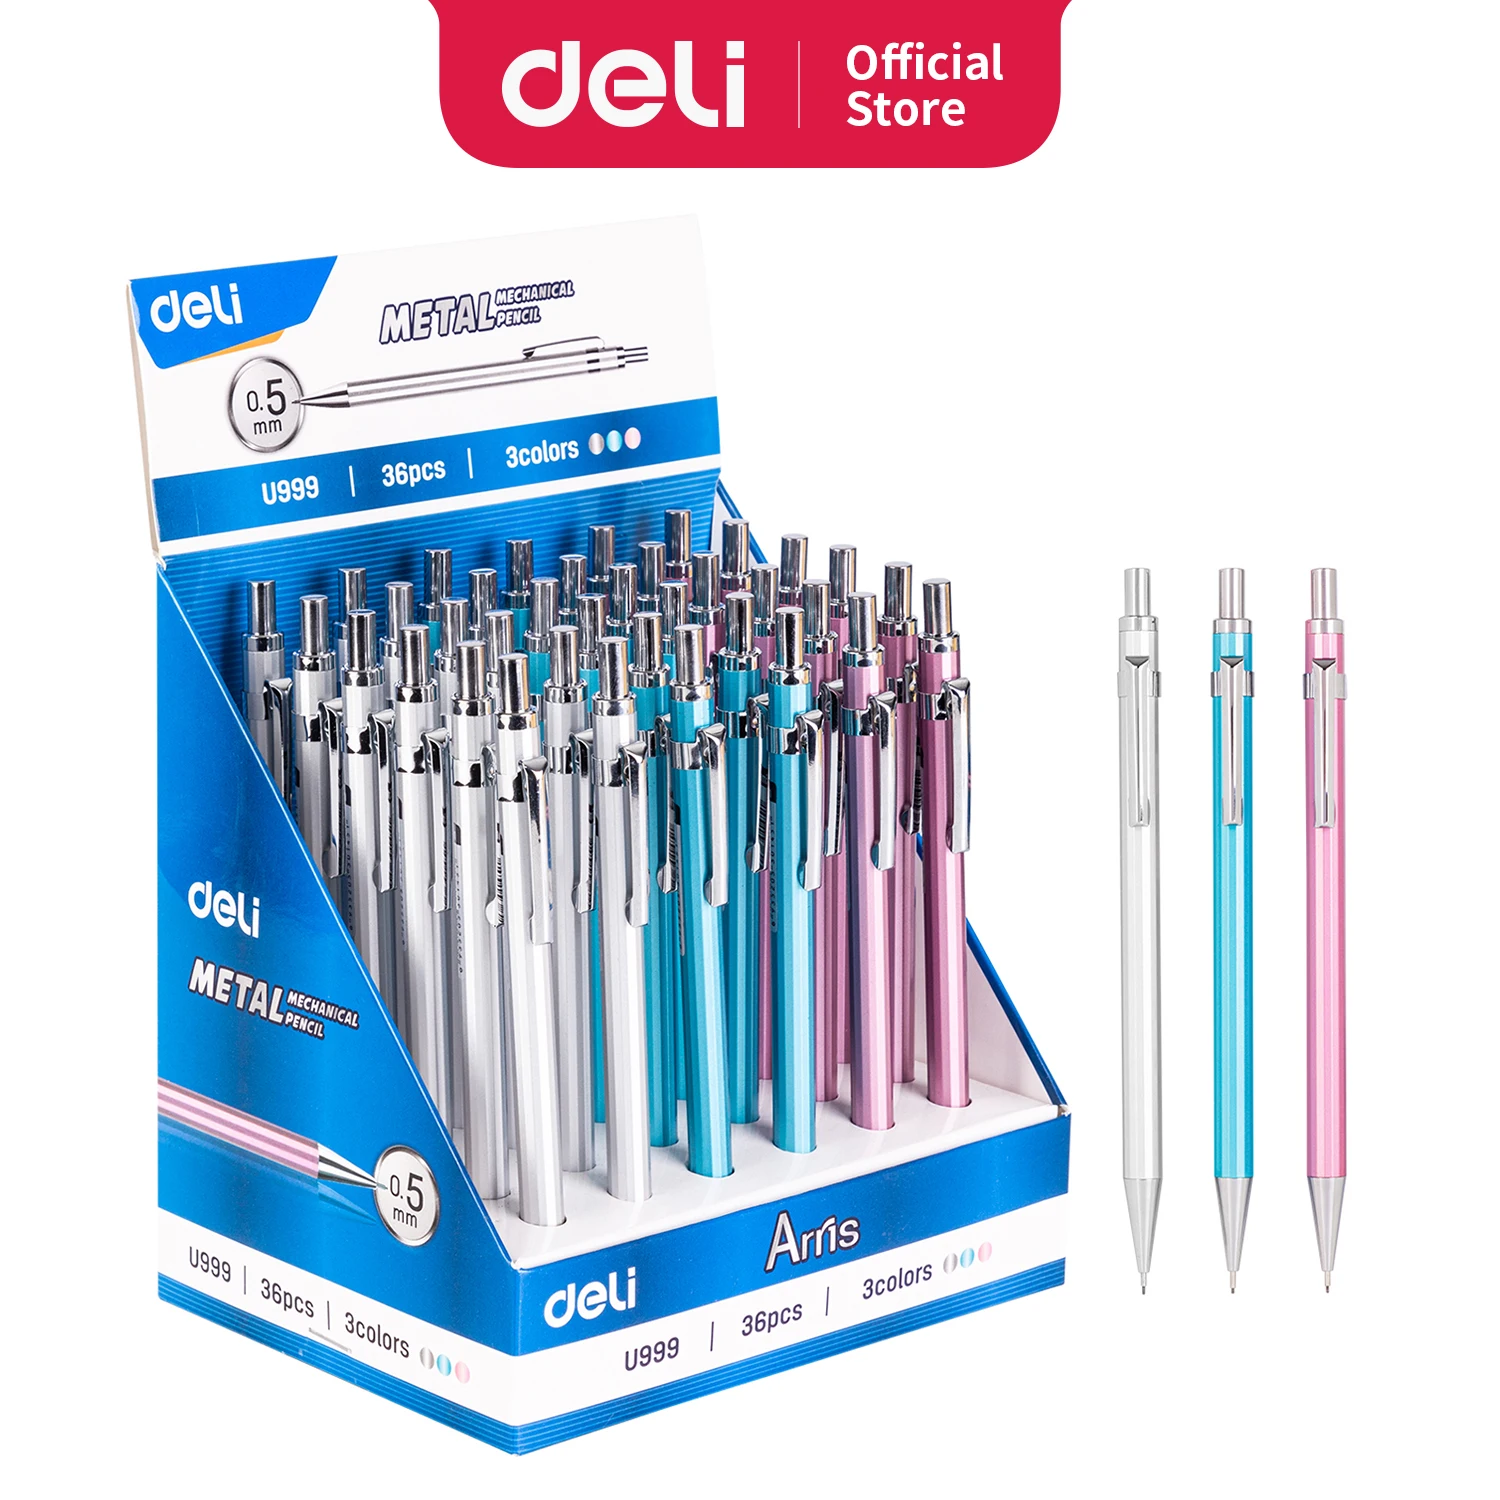 Deli Metal Mechanical Pencil 0.5mm 0.7mm with Lead Retractable Black Lead Pencils Stationery School Supplies Art Sketch Writing 12 pcs box creative student simple needle lead gel pen 0 5mm black red blue ink examination learning stationery office supplies